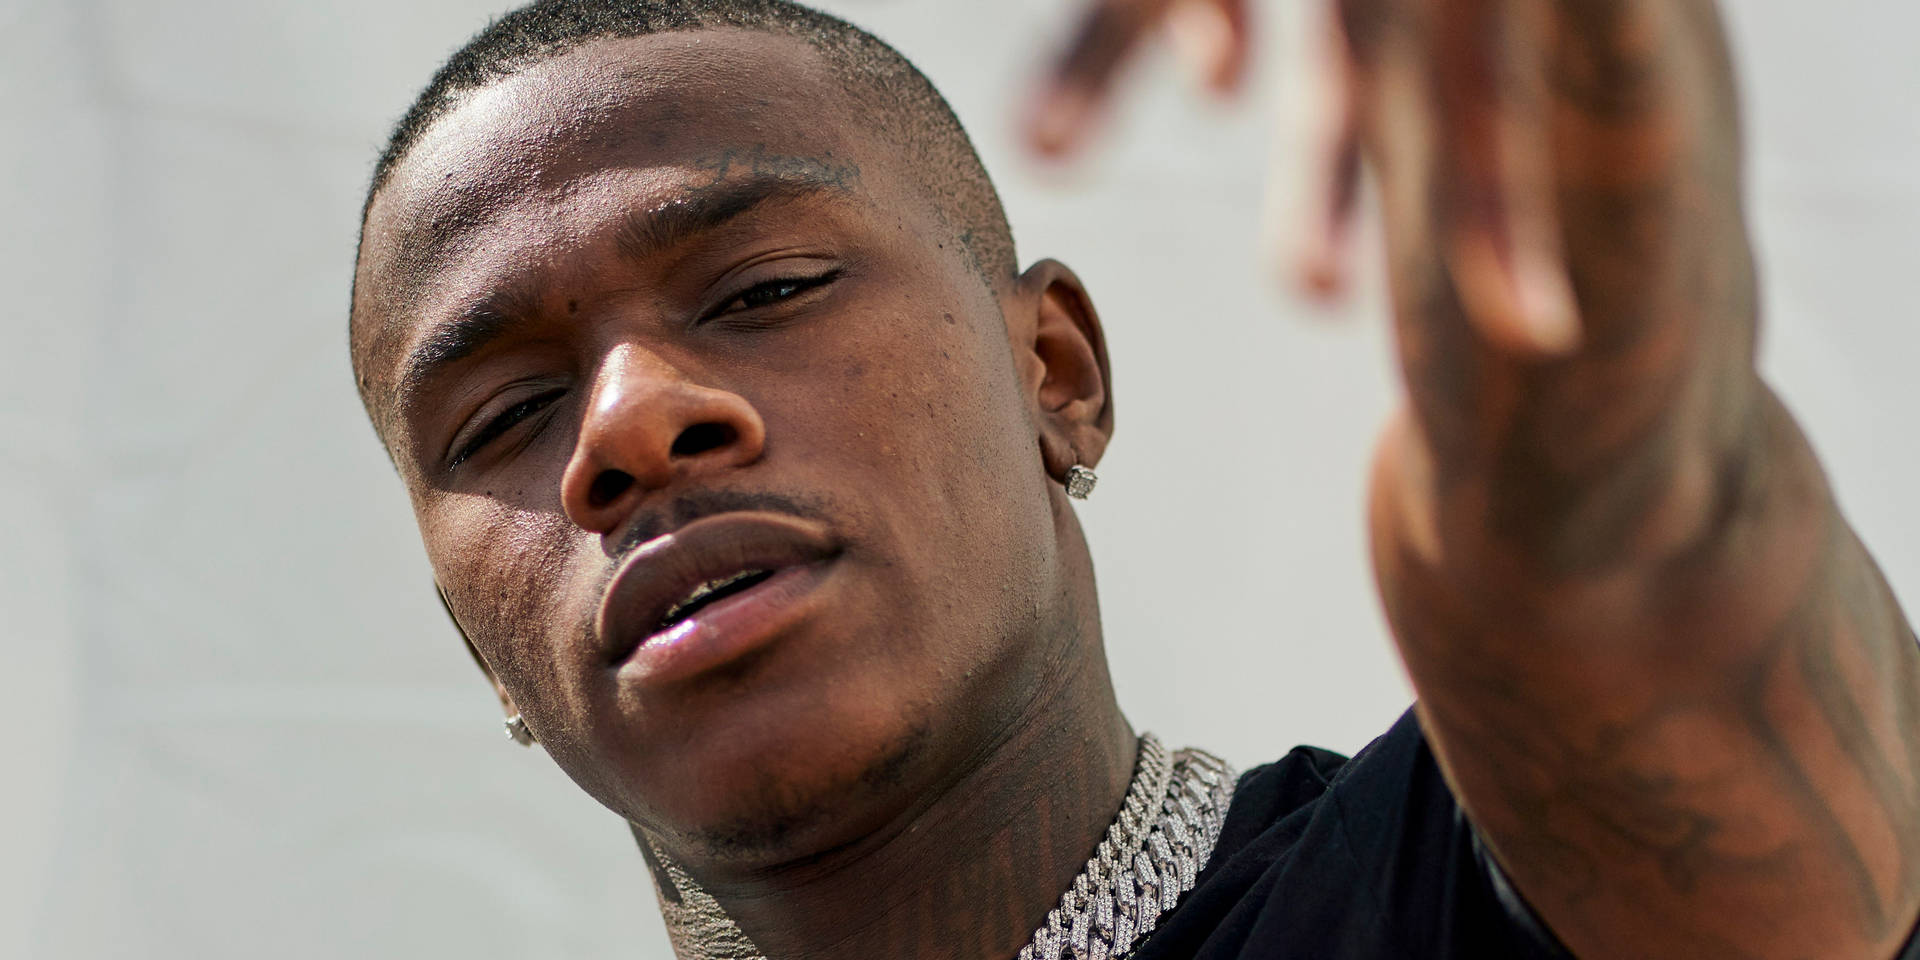 Dababy Haircut 2021 New Hairstyle Background